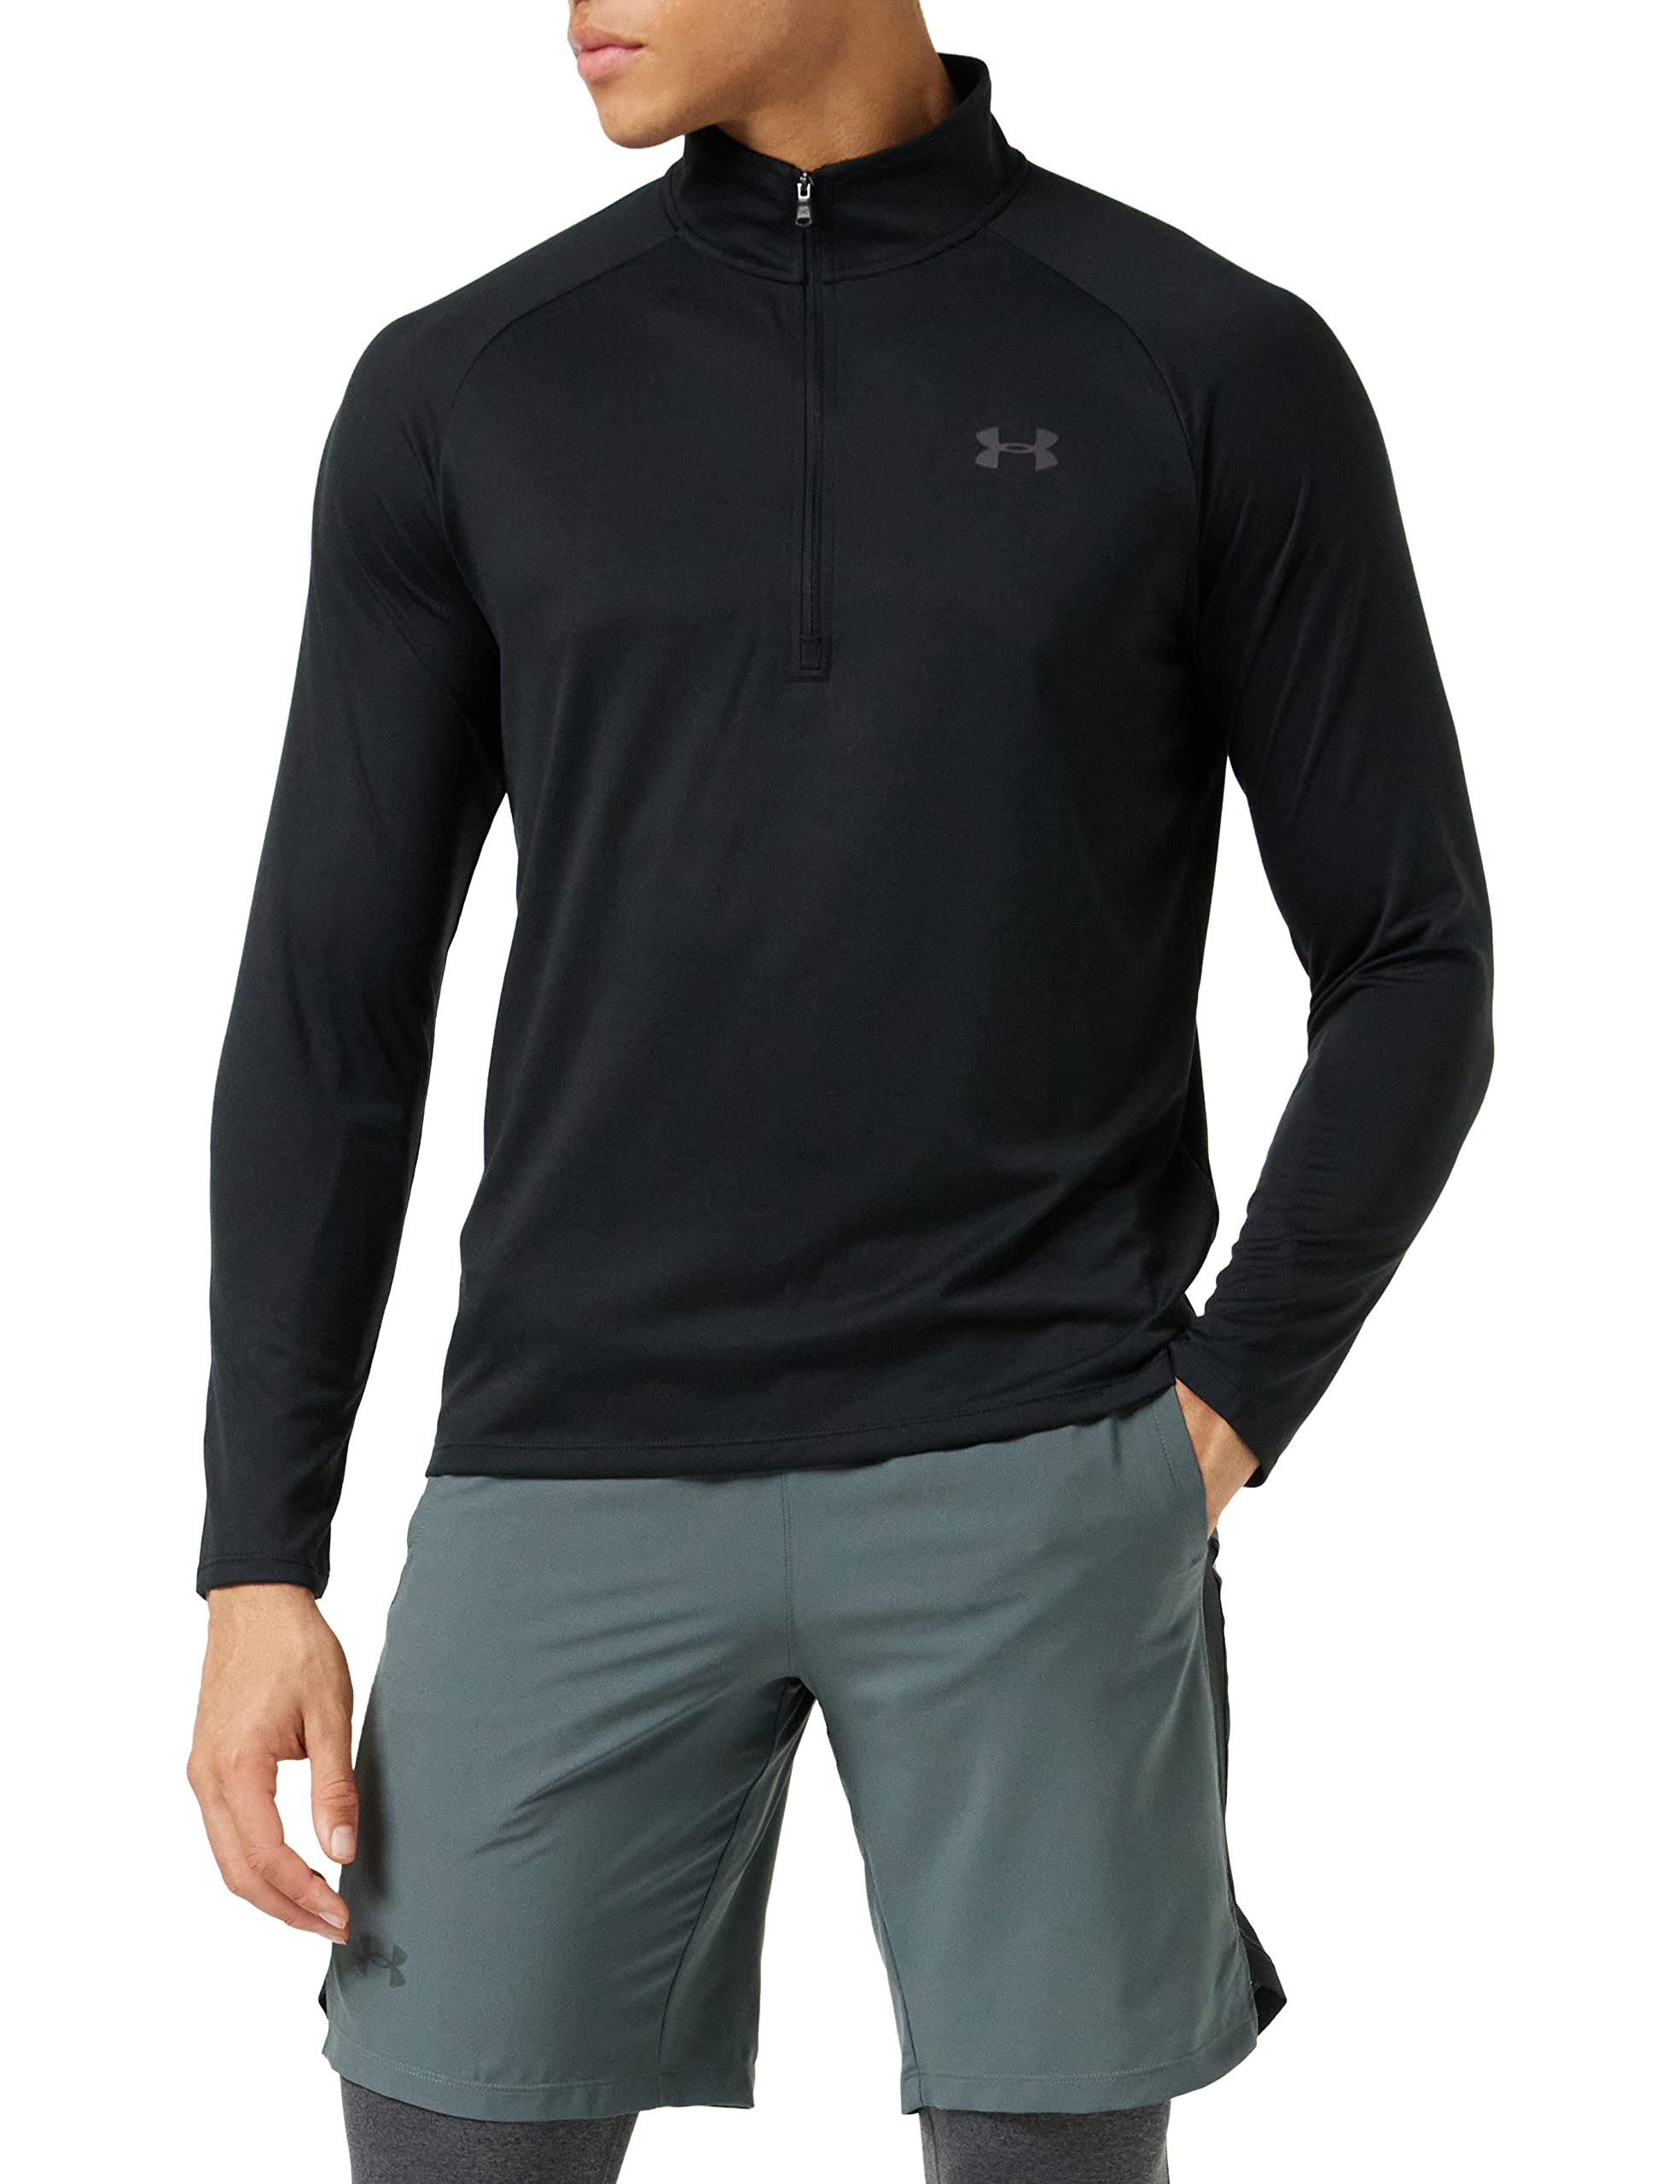 Under Armour Men’s Tech 2.0 ½ Zip Long Sleeve (Black) $17.48 + Free Shipping w/ Prime or on $35+